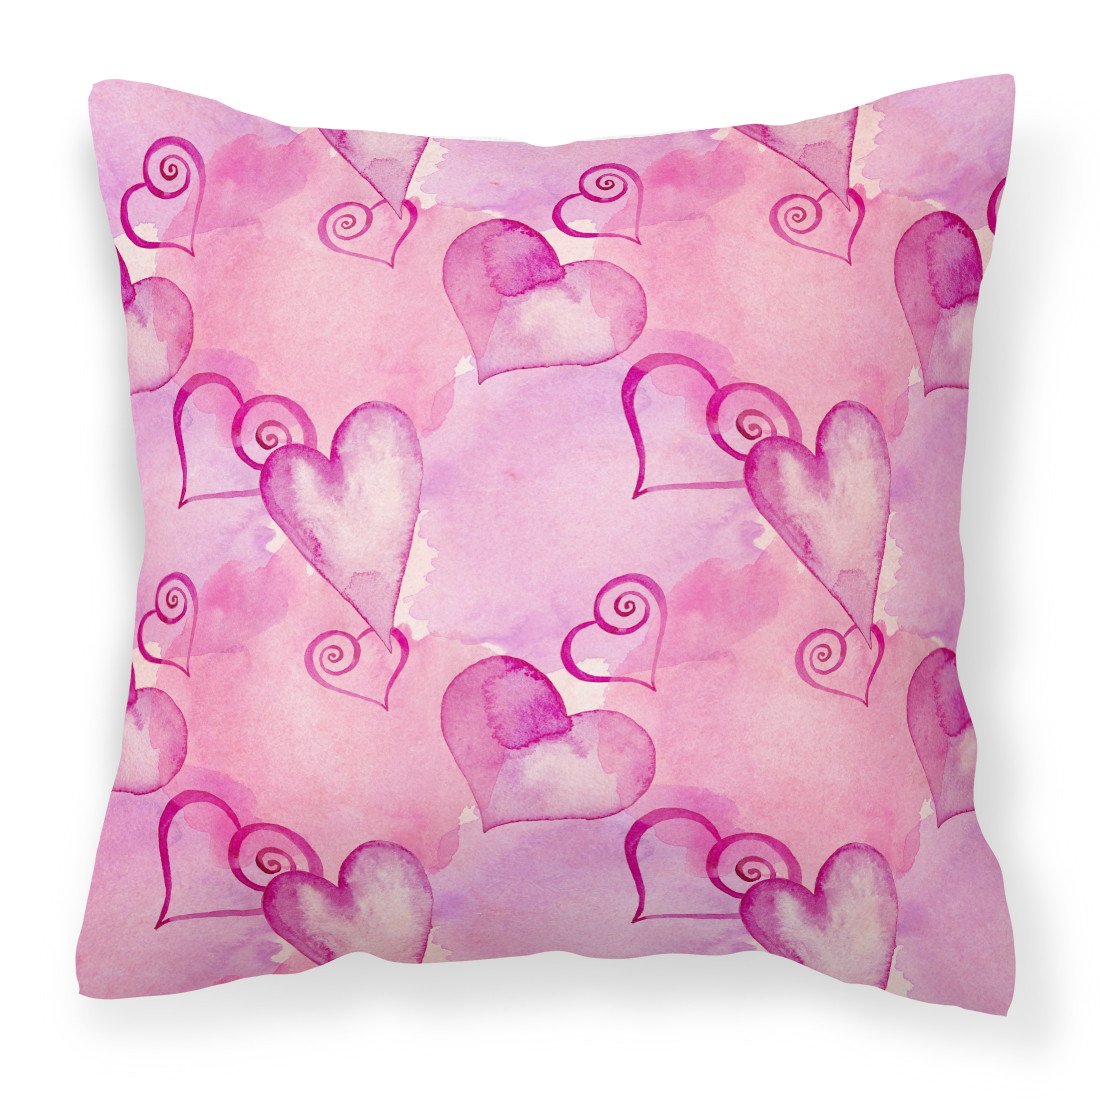 Watercolor Hot Pink Hearts Fabric Decorative Pillow BB7564PW1818 by Caroline's Treasures